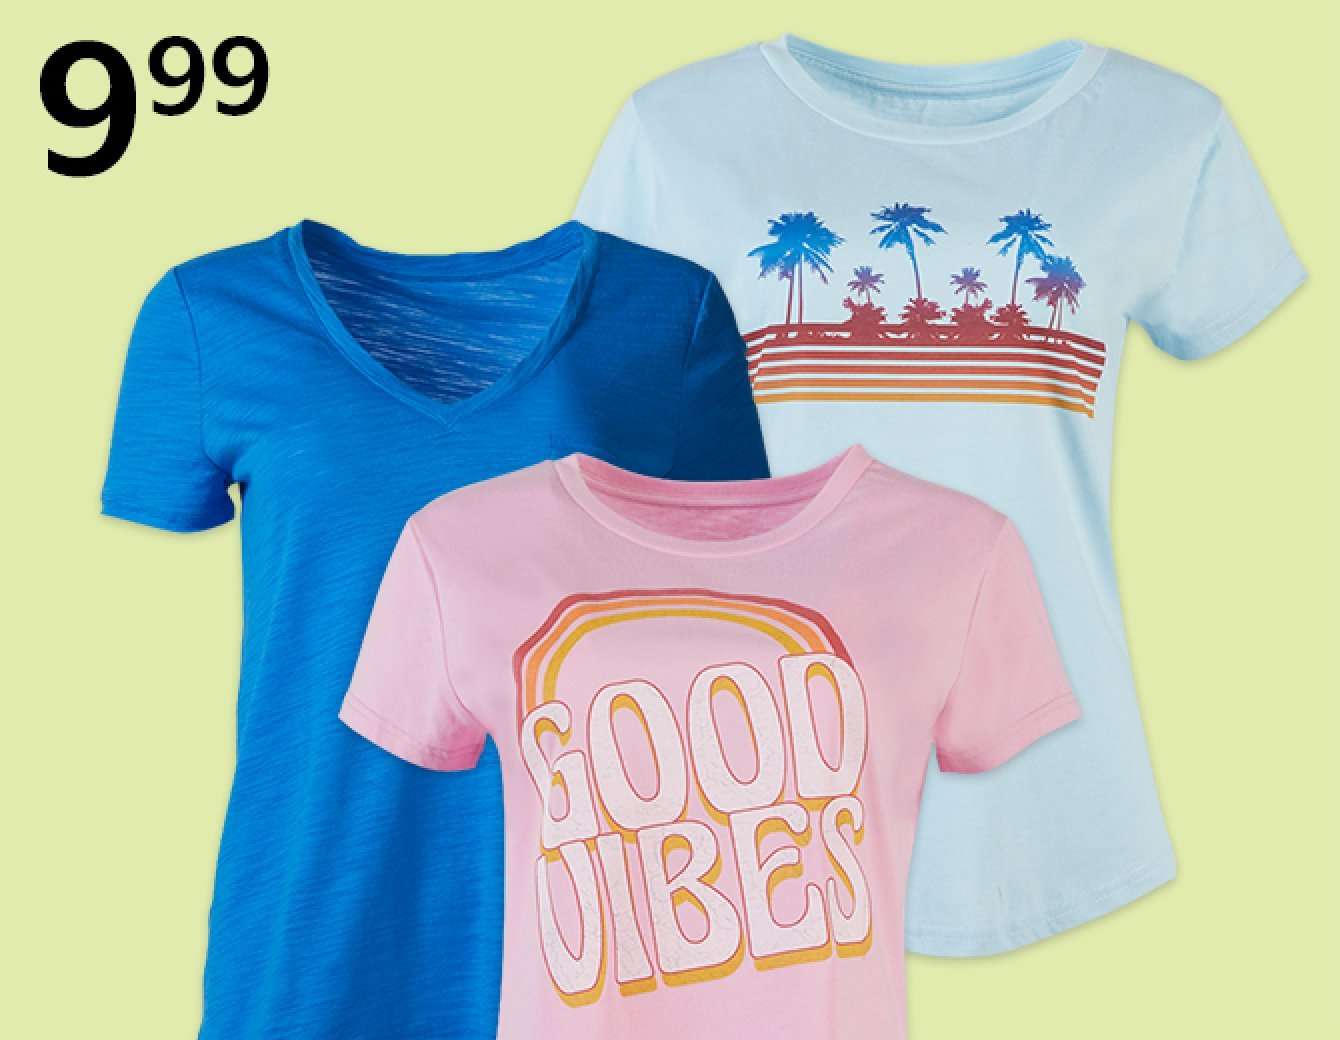 9.99 select tees for women